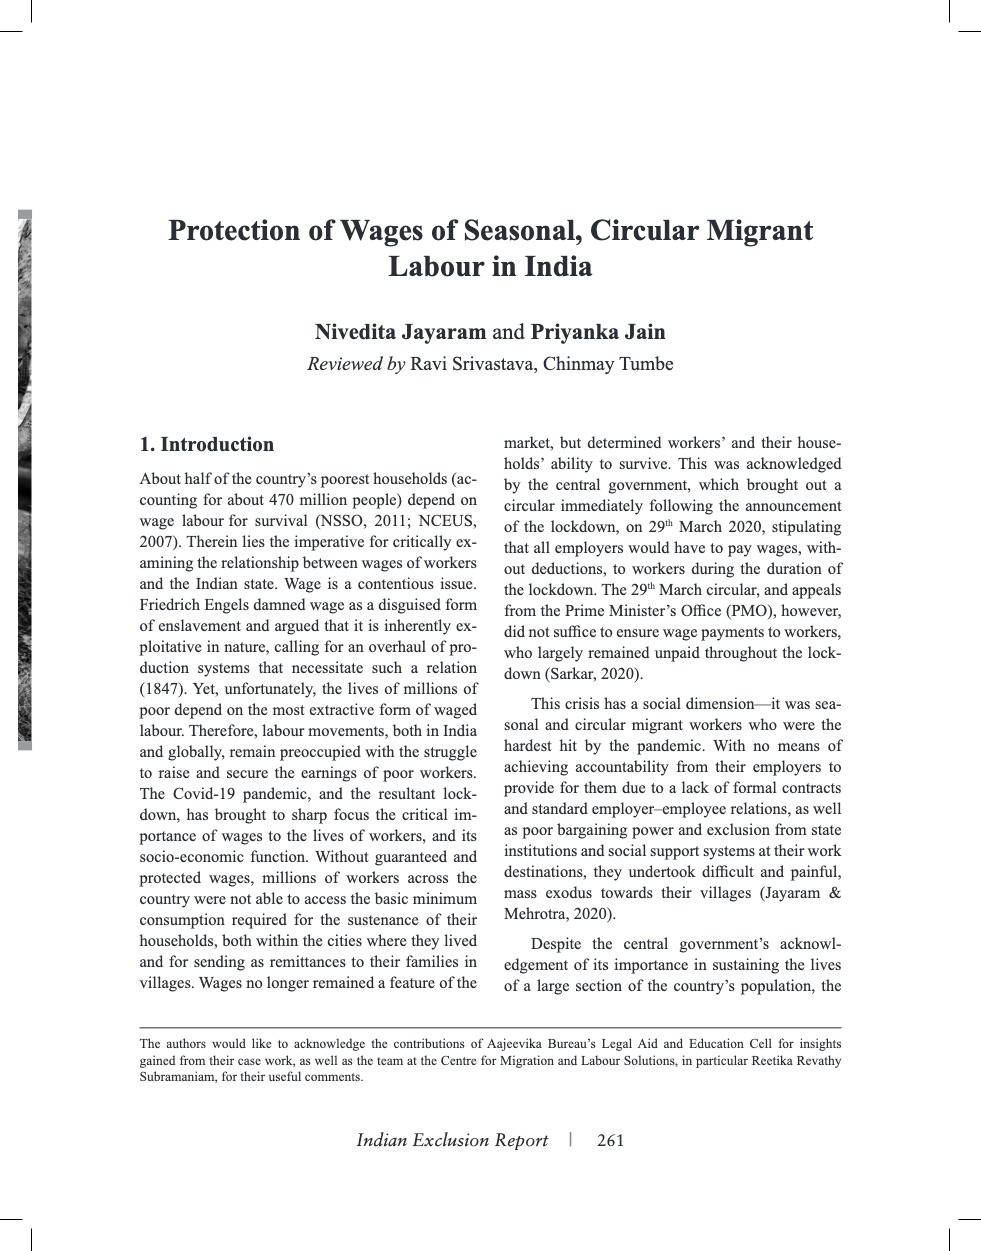 India Exclusion Report Protection of Wages